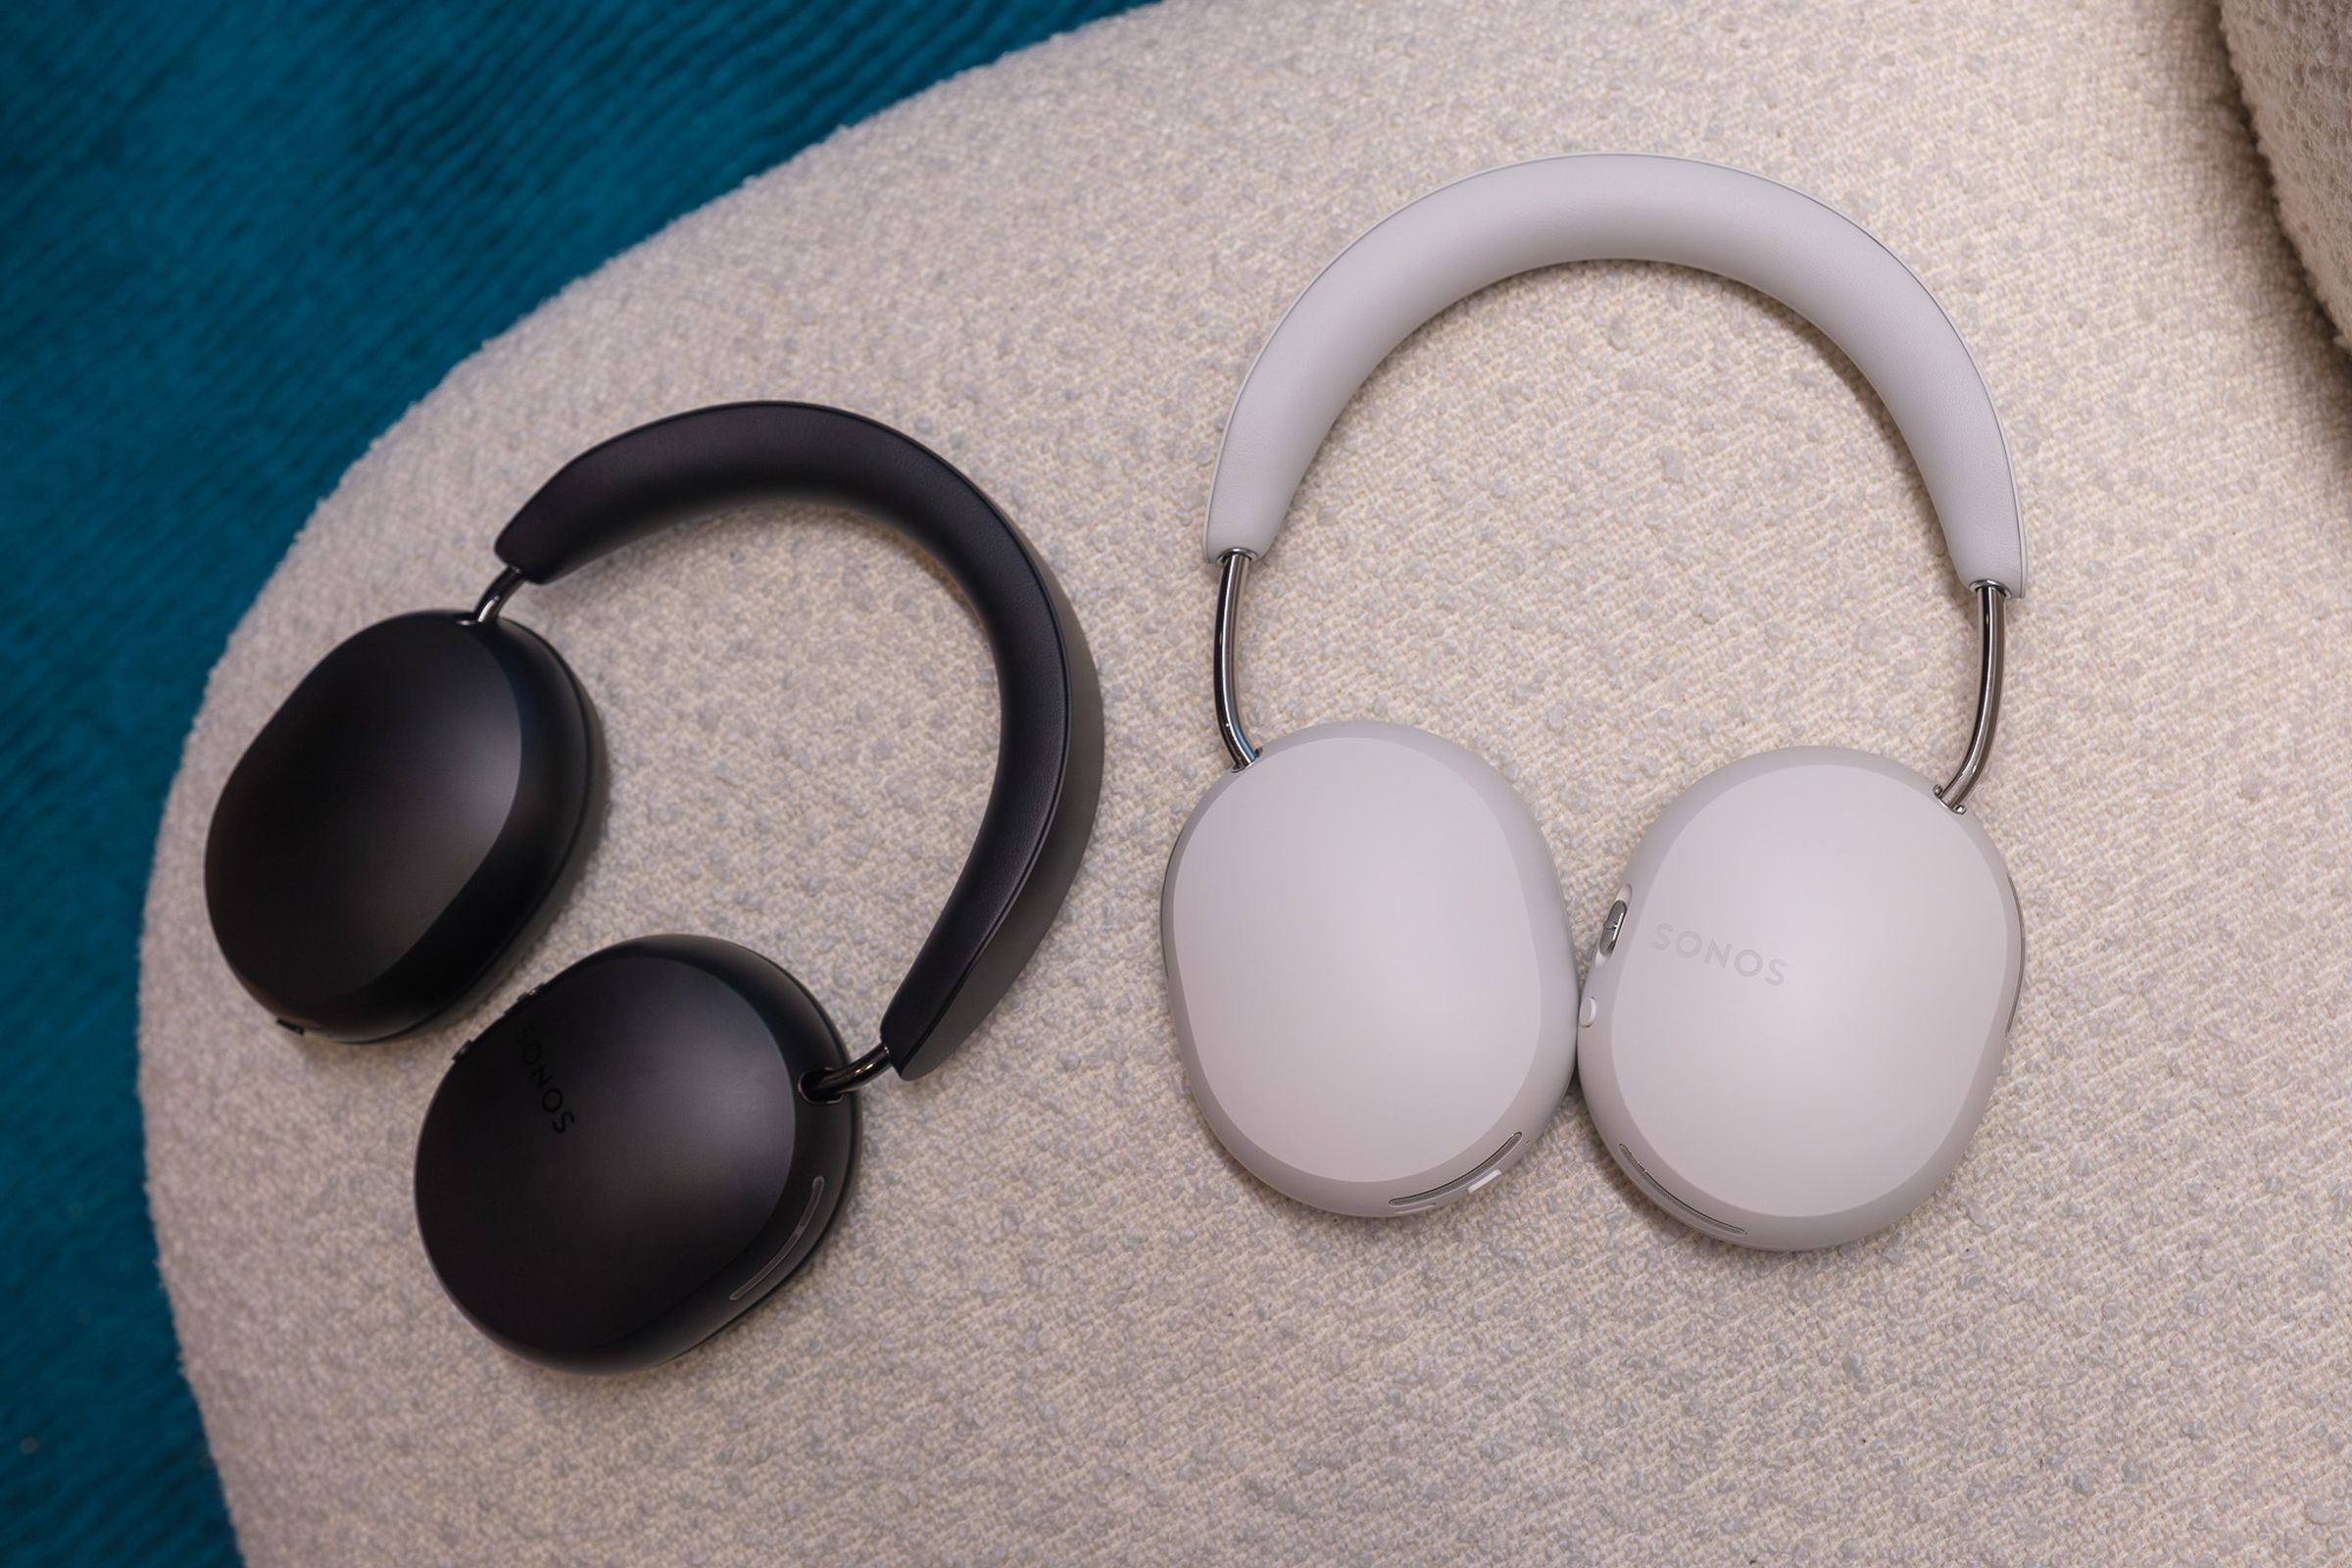 A hands-on photo of the Sonos Ace headphones at an event in New York City.